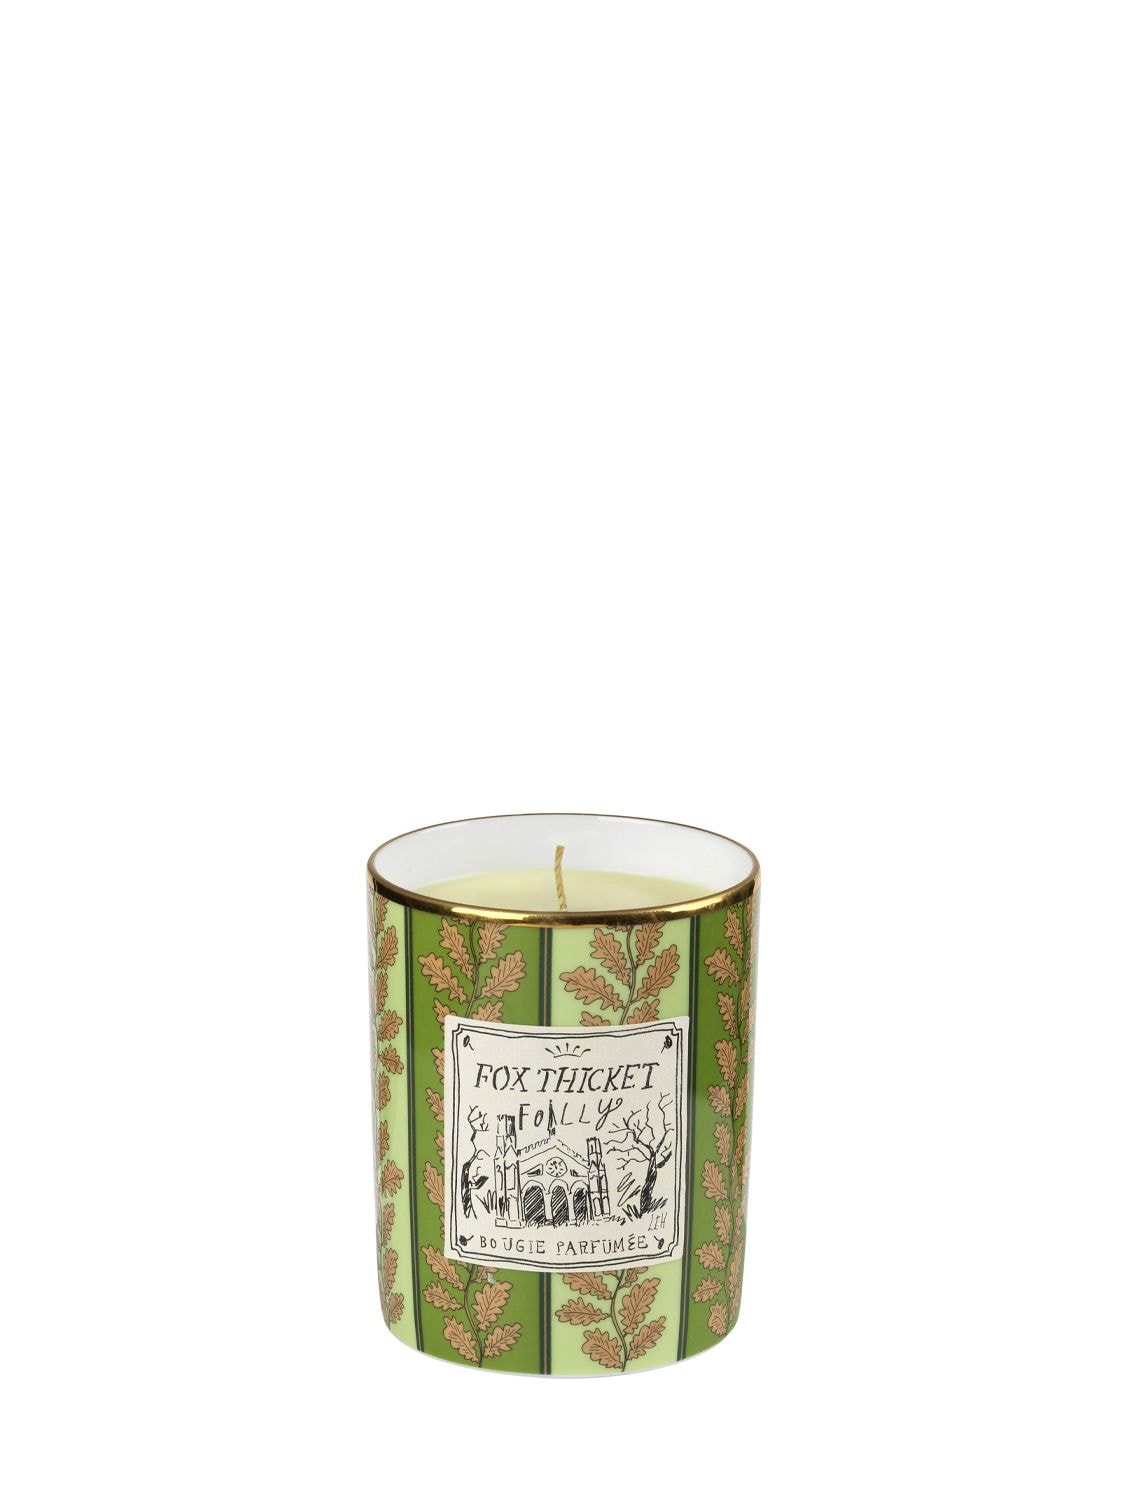 Ginori 1735 Fox Thicket Folly Regular Scented Candle In Green